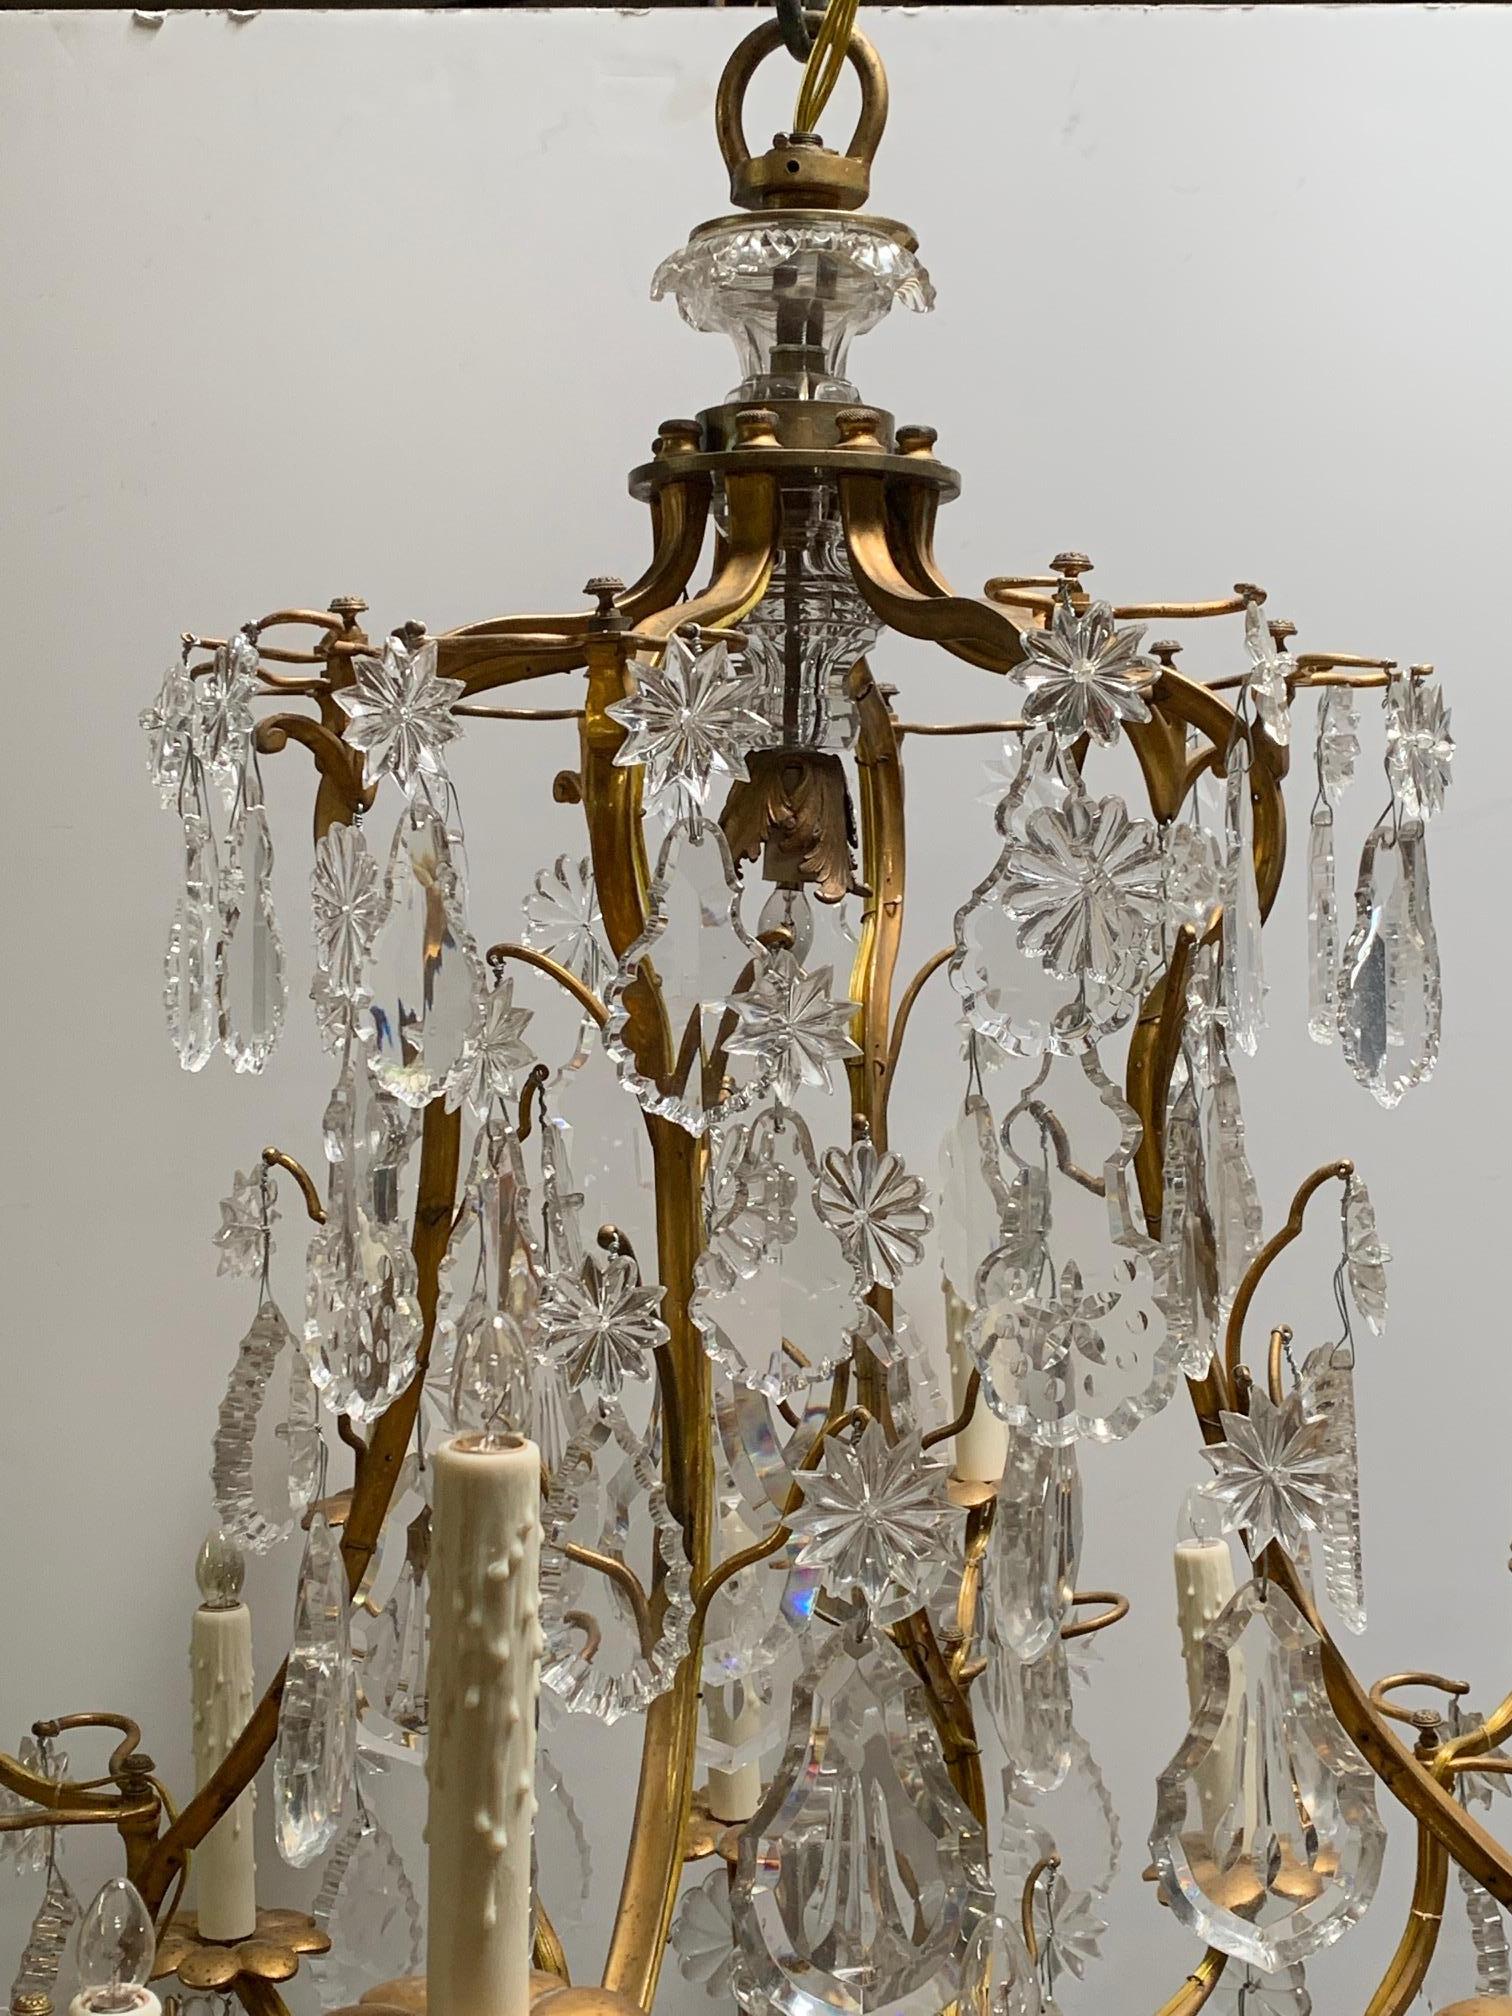 A large 19th century bronze dore and crystal chandelier The grand chandelier is from the late 19th century. This 16-light chandelier is constructed of gilded bronze with large cut crystals and a beveled sphere at the base.